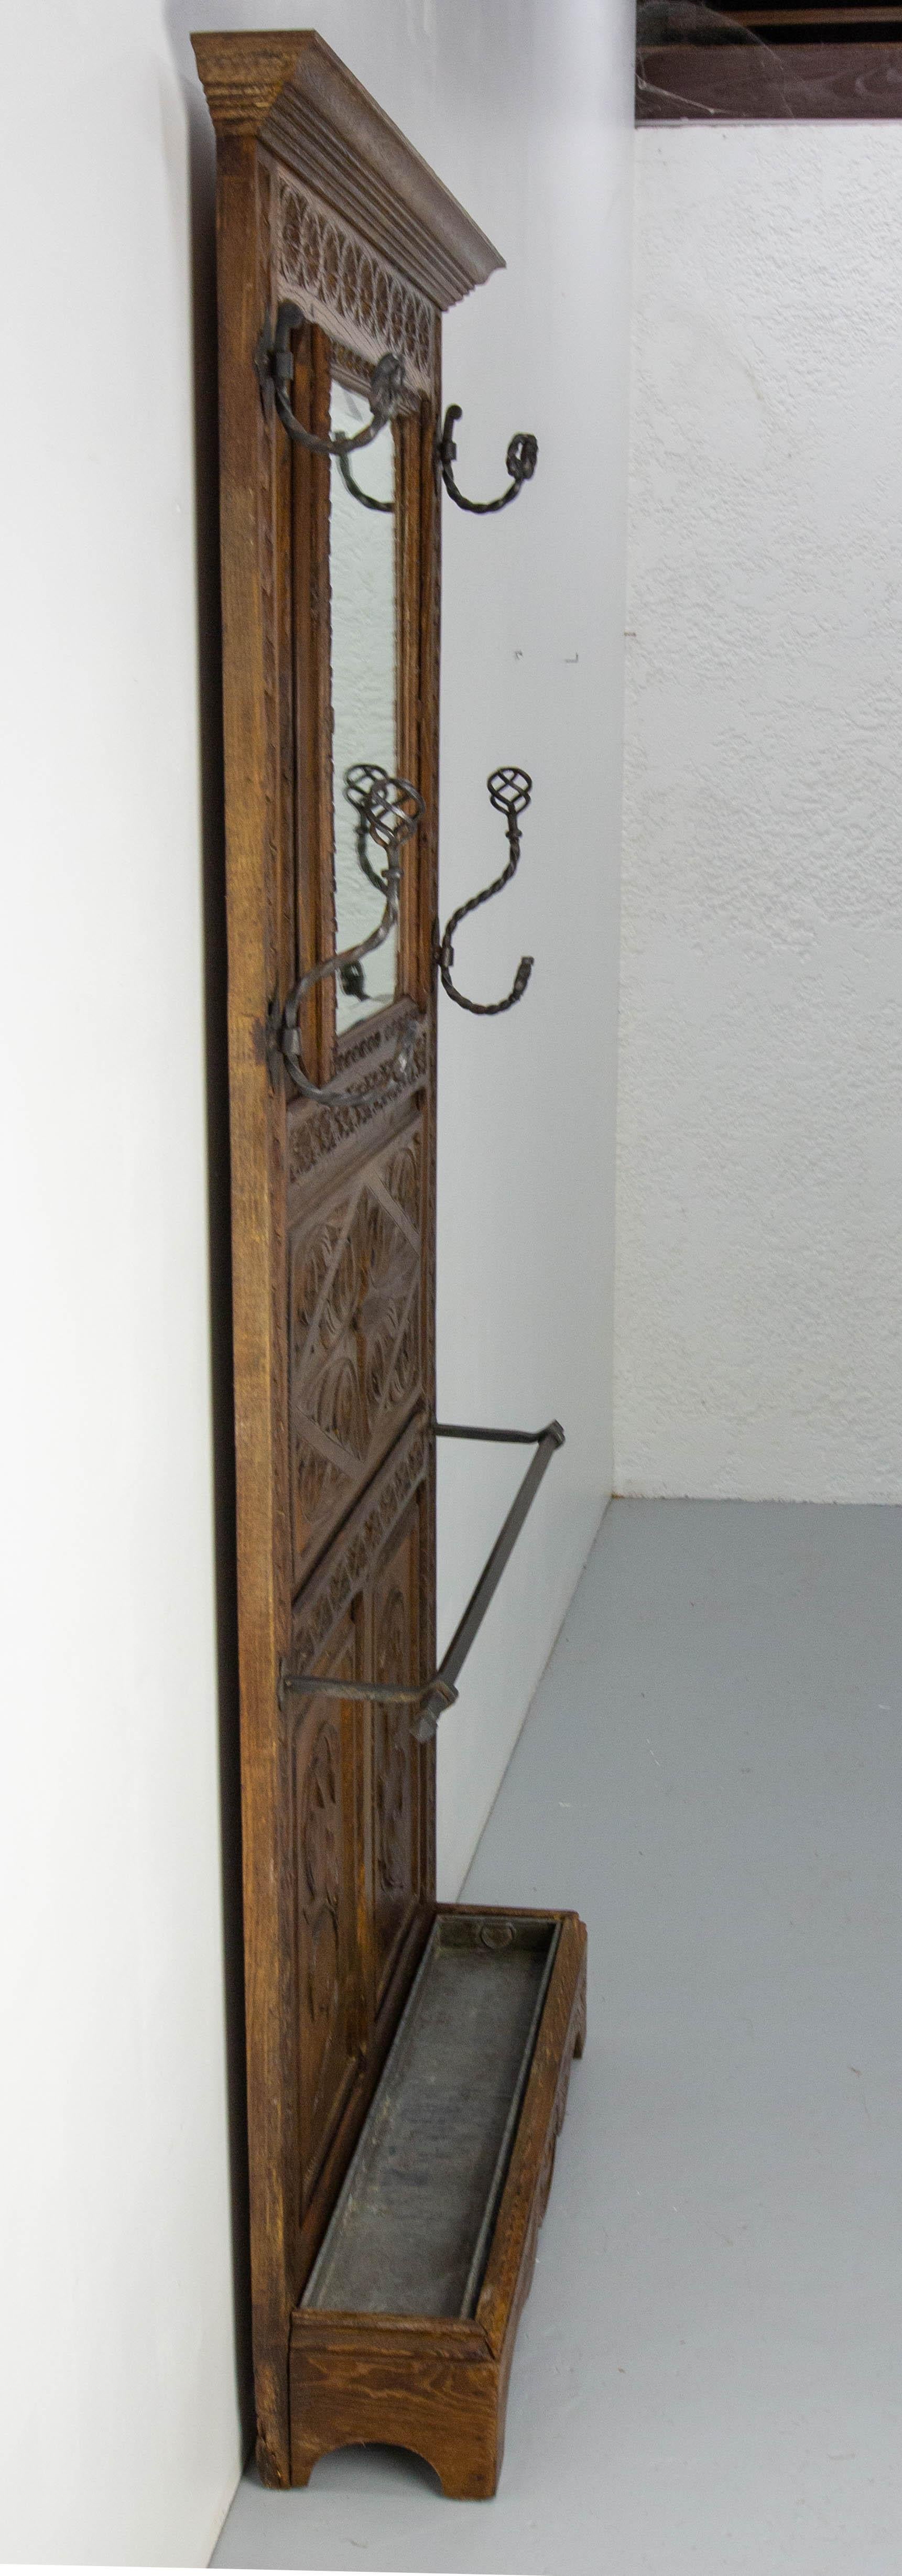 French Coat Hat Rack Chestnut Mirror Wrough Iron & Zinc Stand Gothic St 19th C. For Sale 6